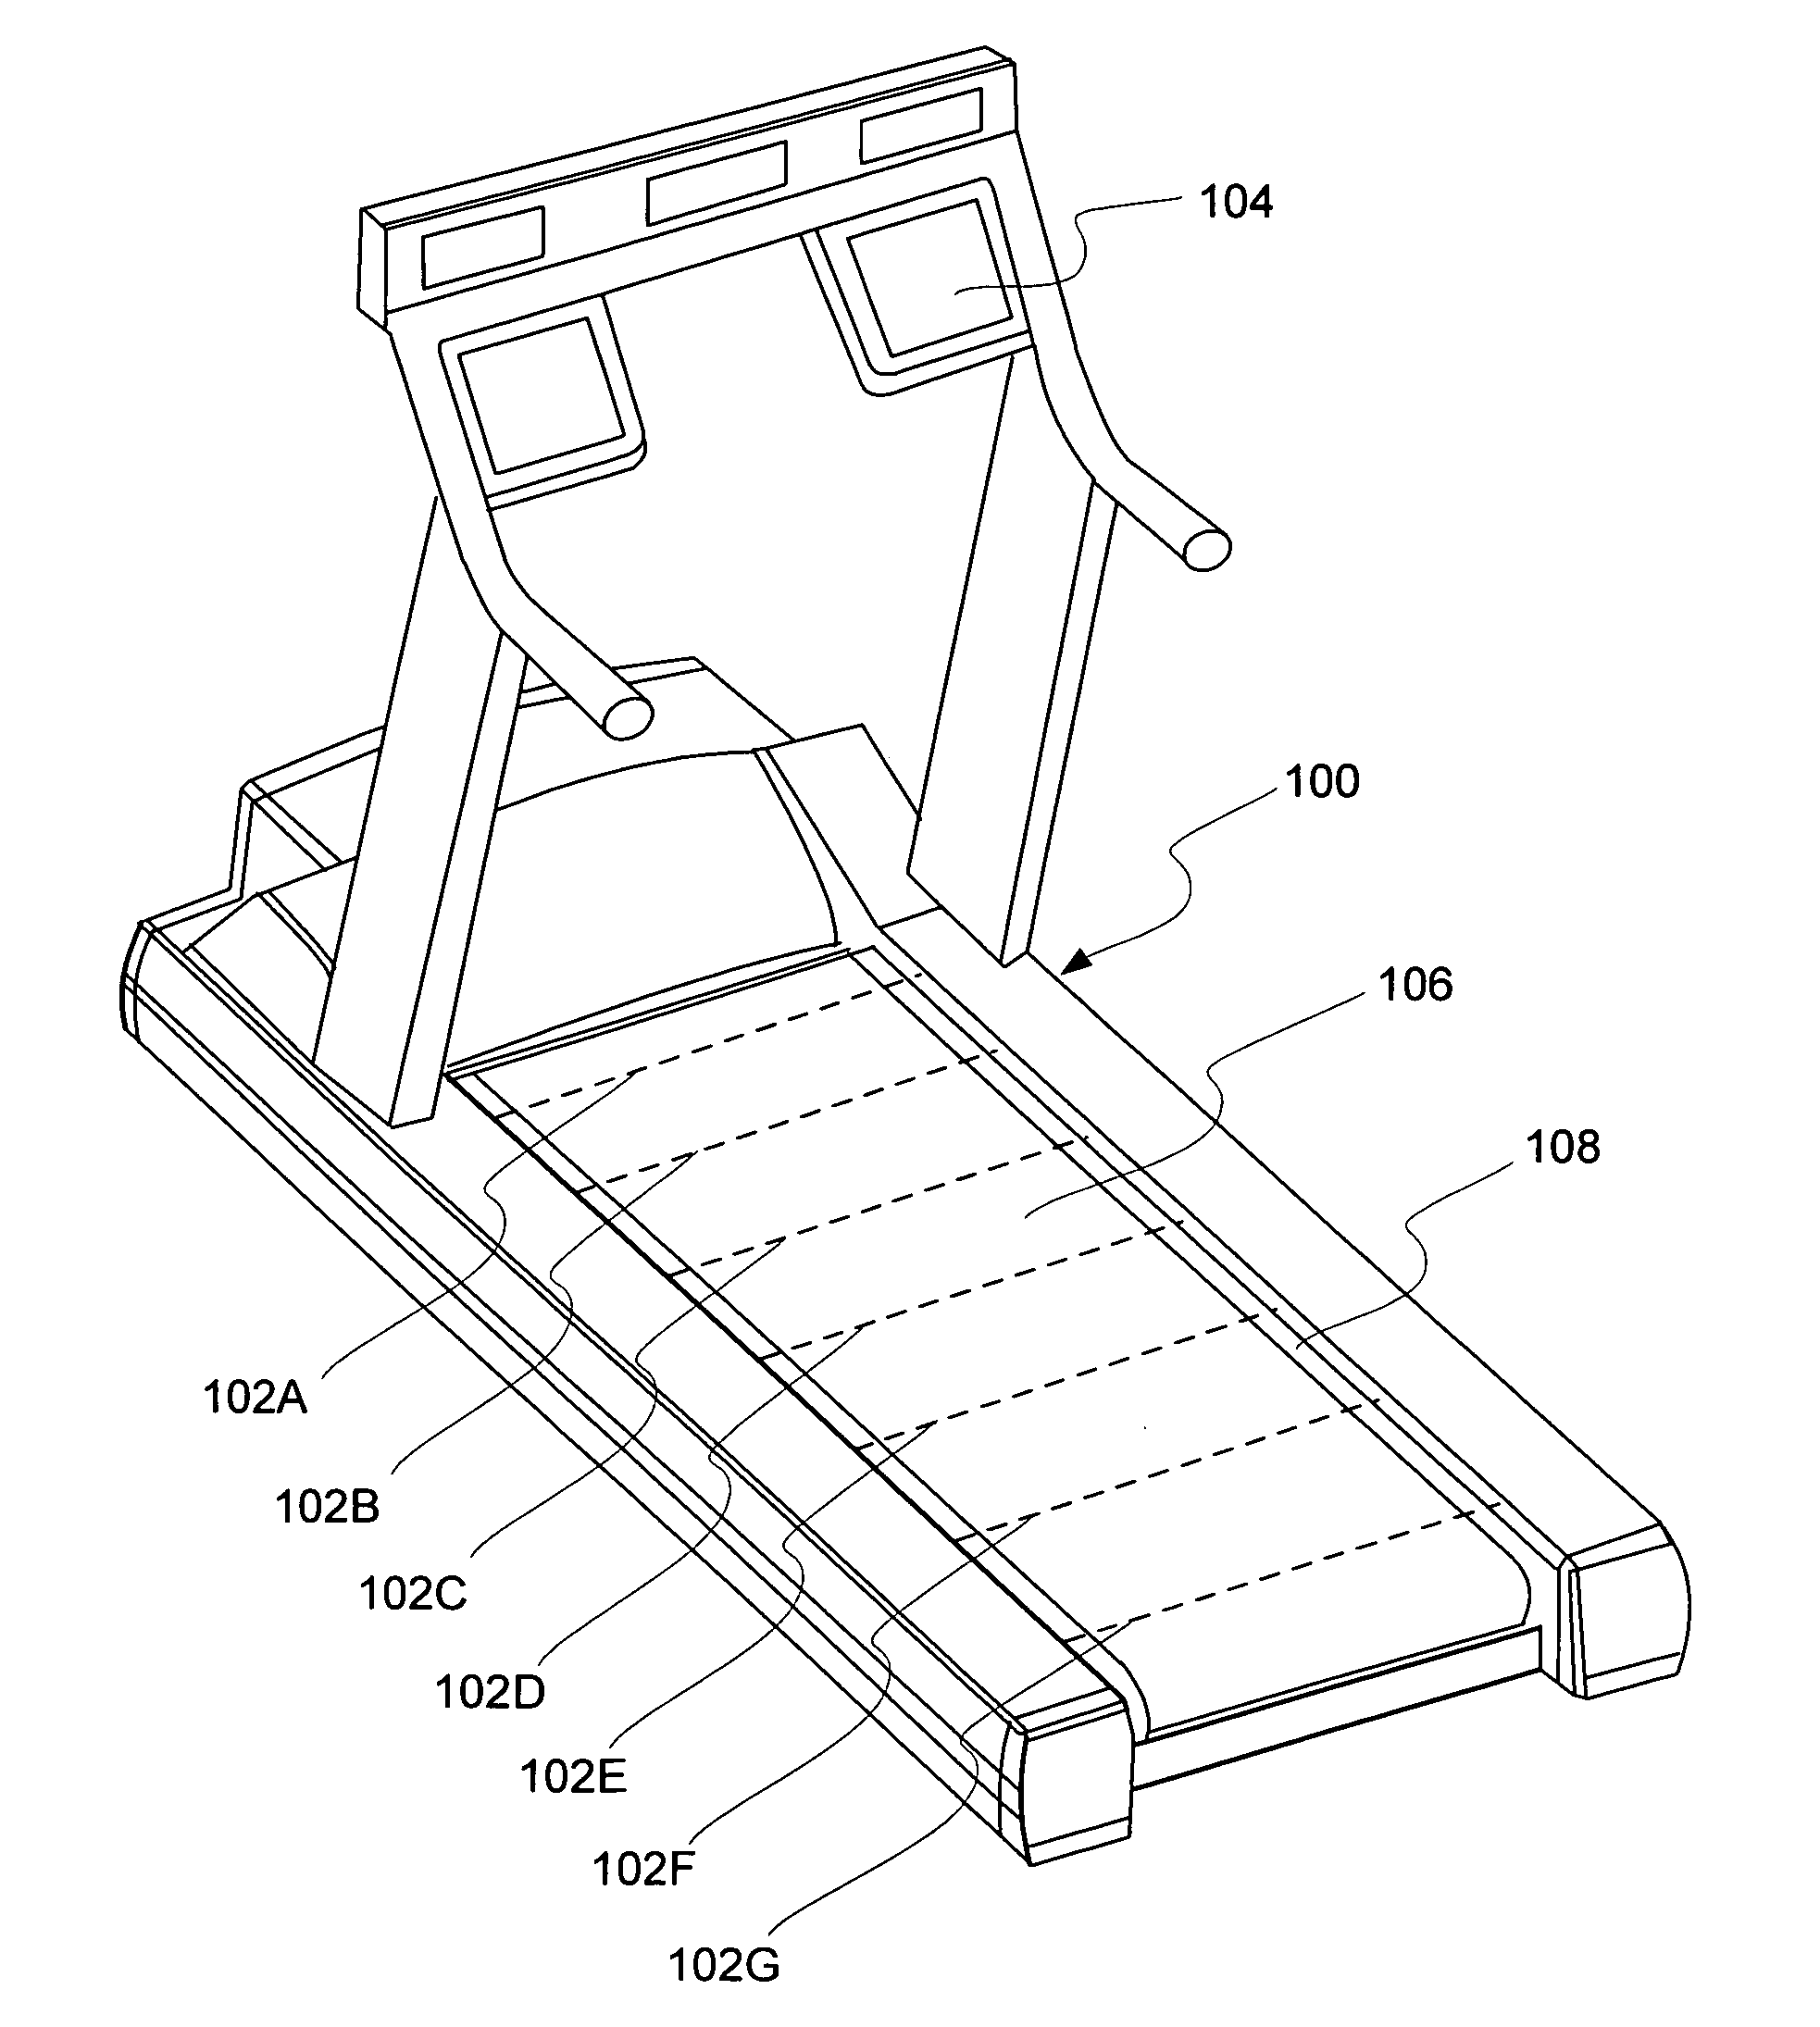 User footfall sensing control system for treadmill exercise machines